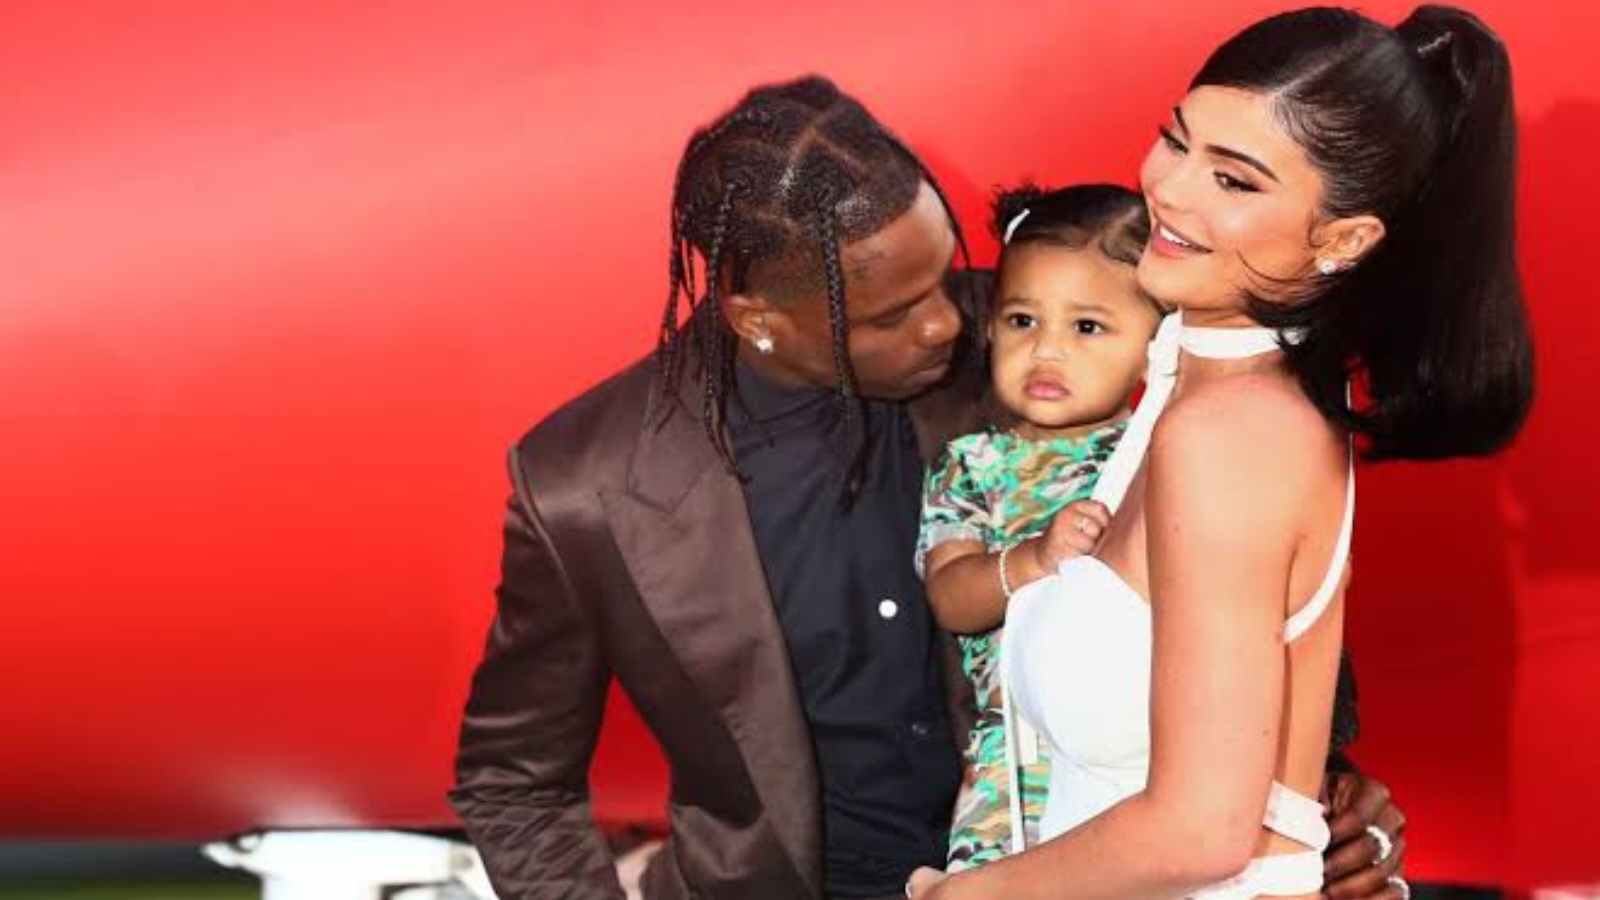 Travis Scott and Kylie Jenner with baby Stormi